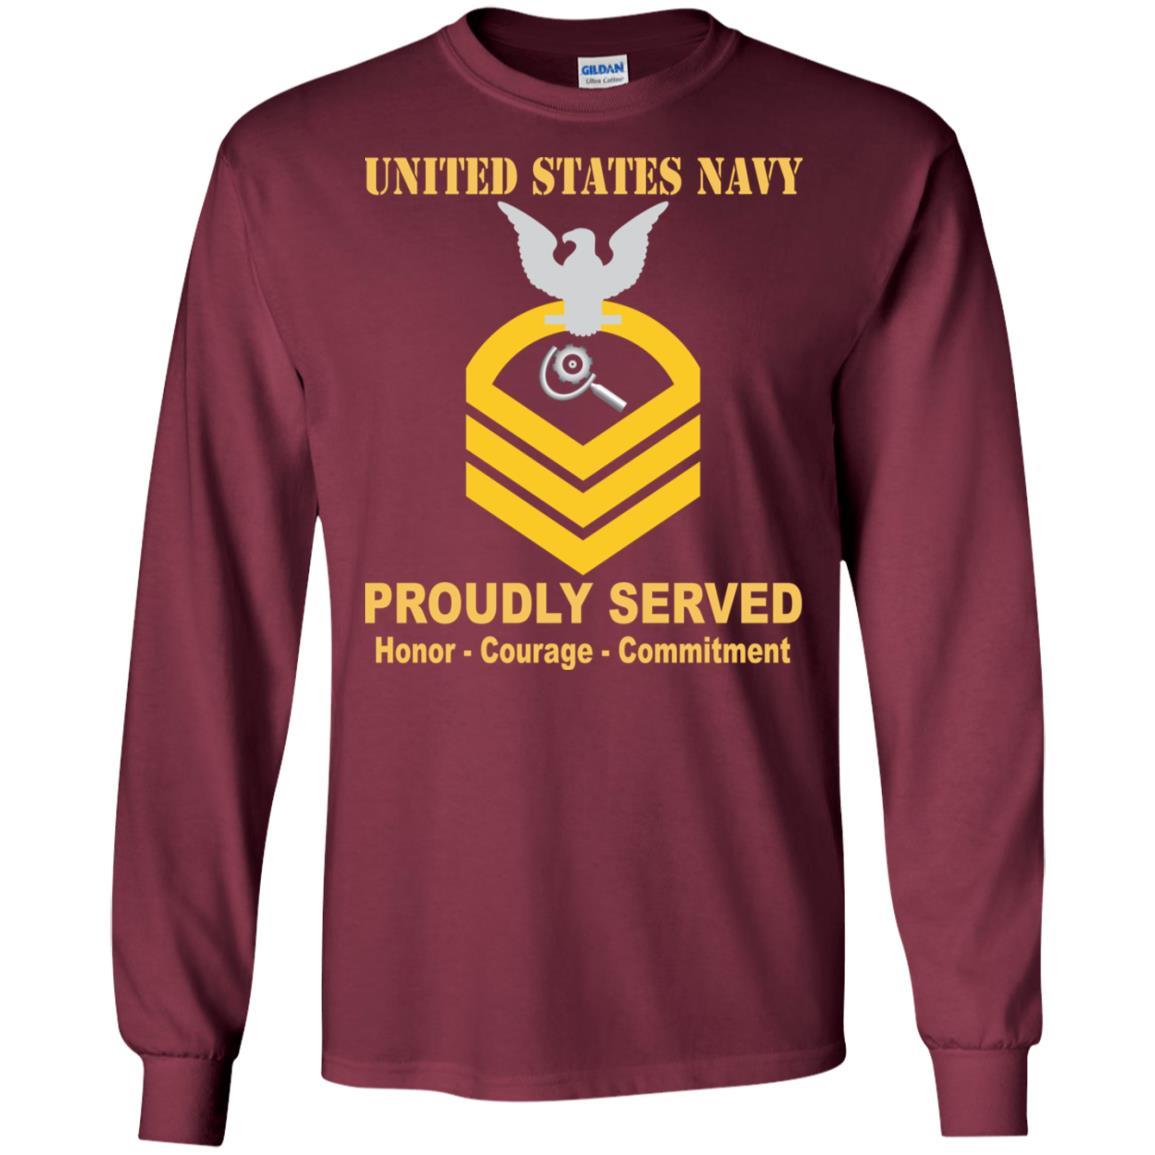 U.S Navy Machinery repairman Navy MR E-7 Rating Badges Proudly Served T-Shirt For Men On Front-TShirt-Navy-Veterans Nation